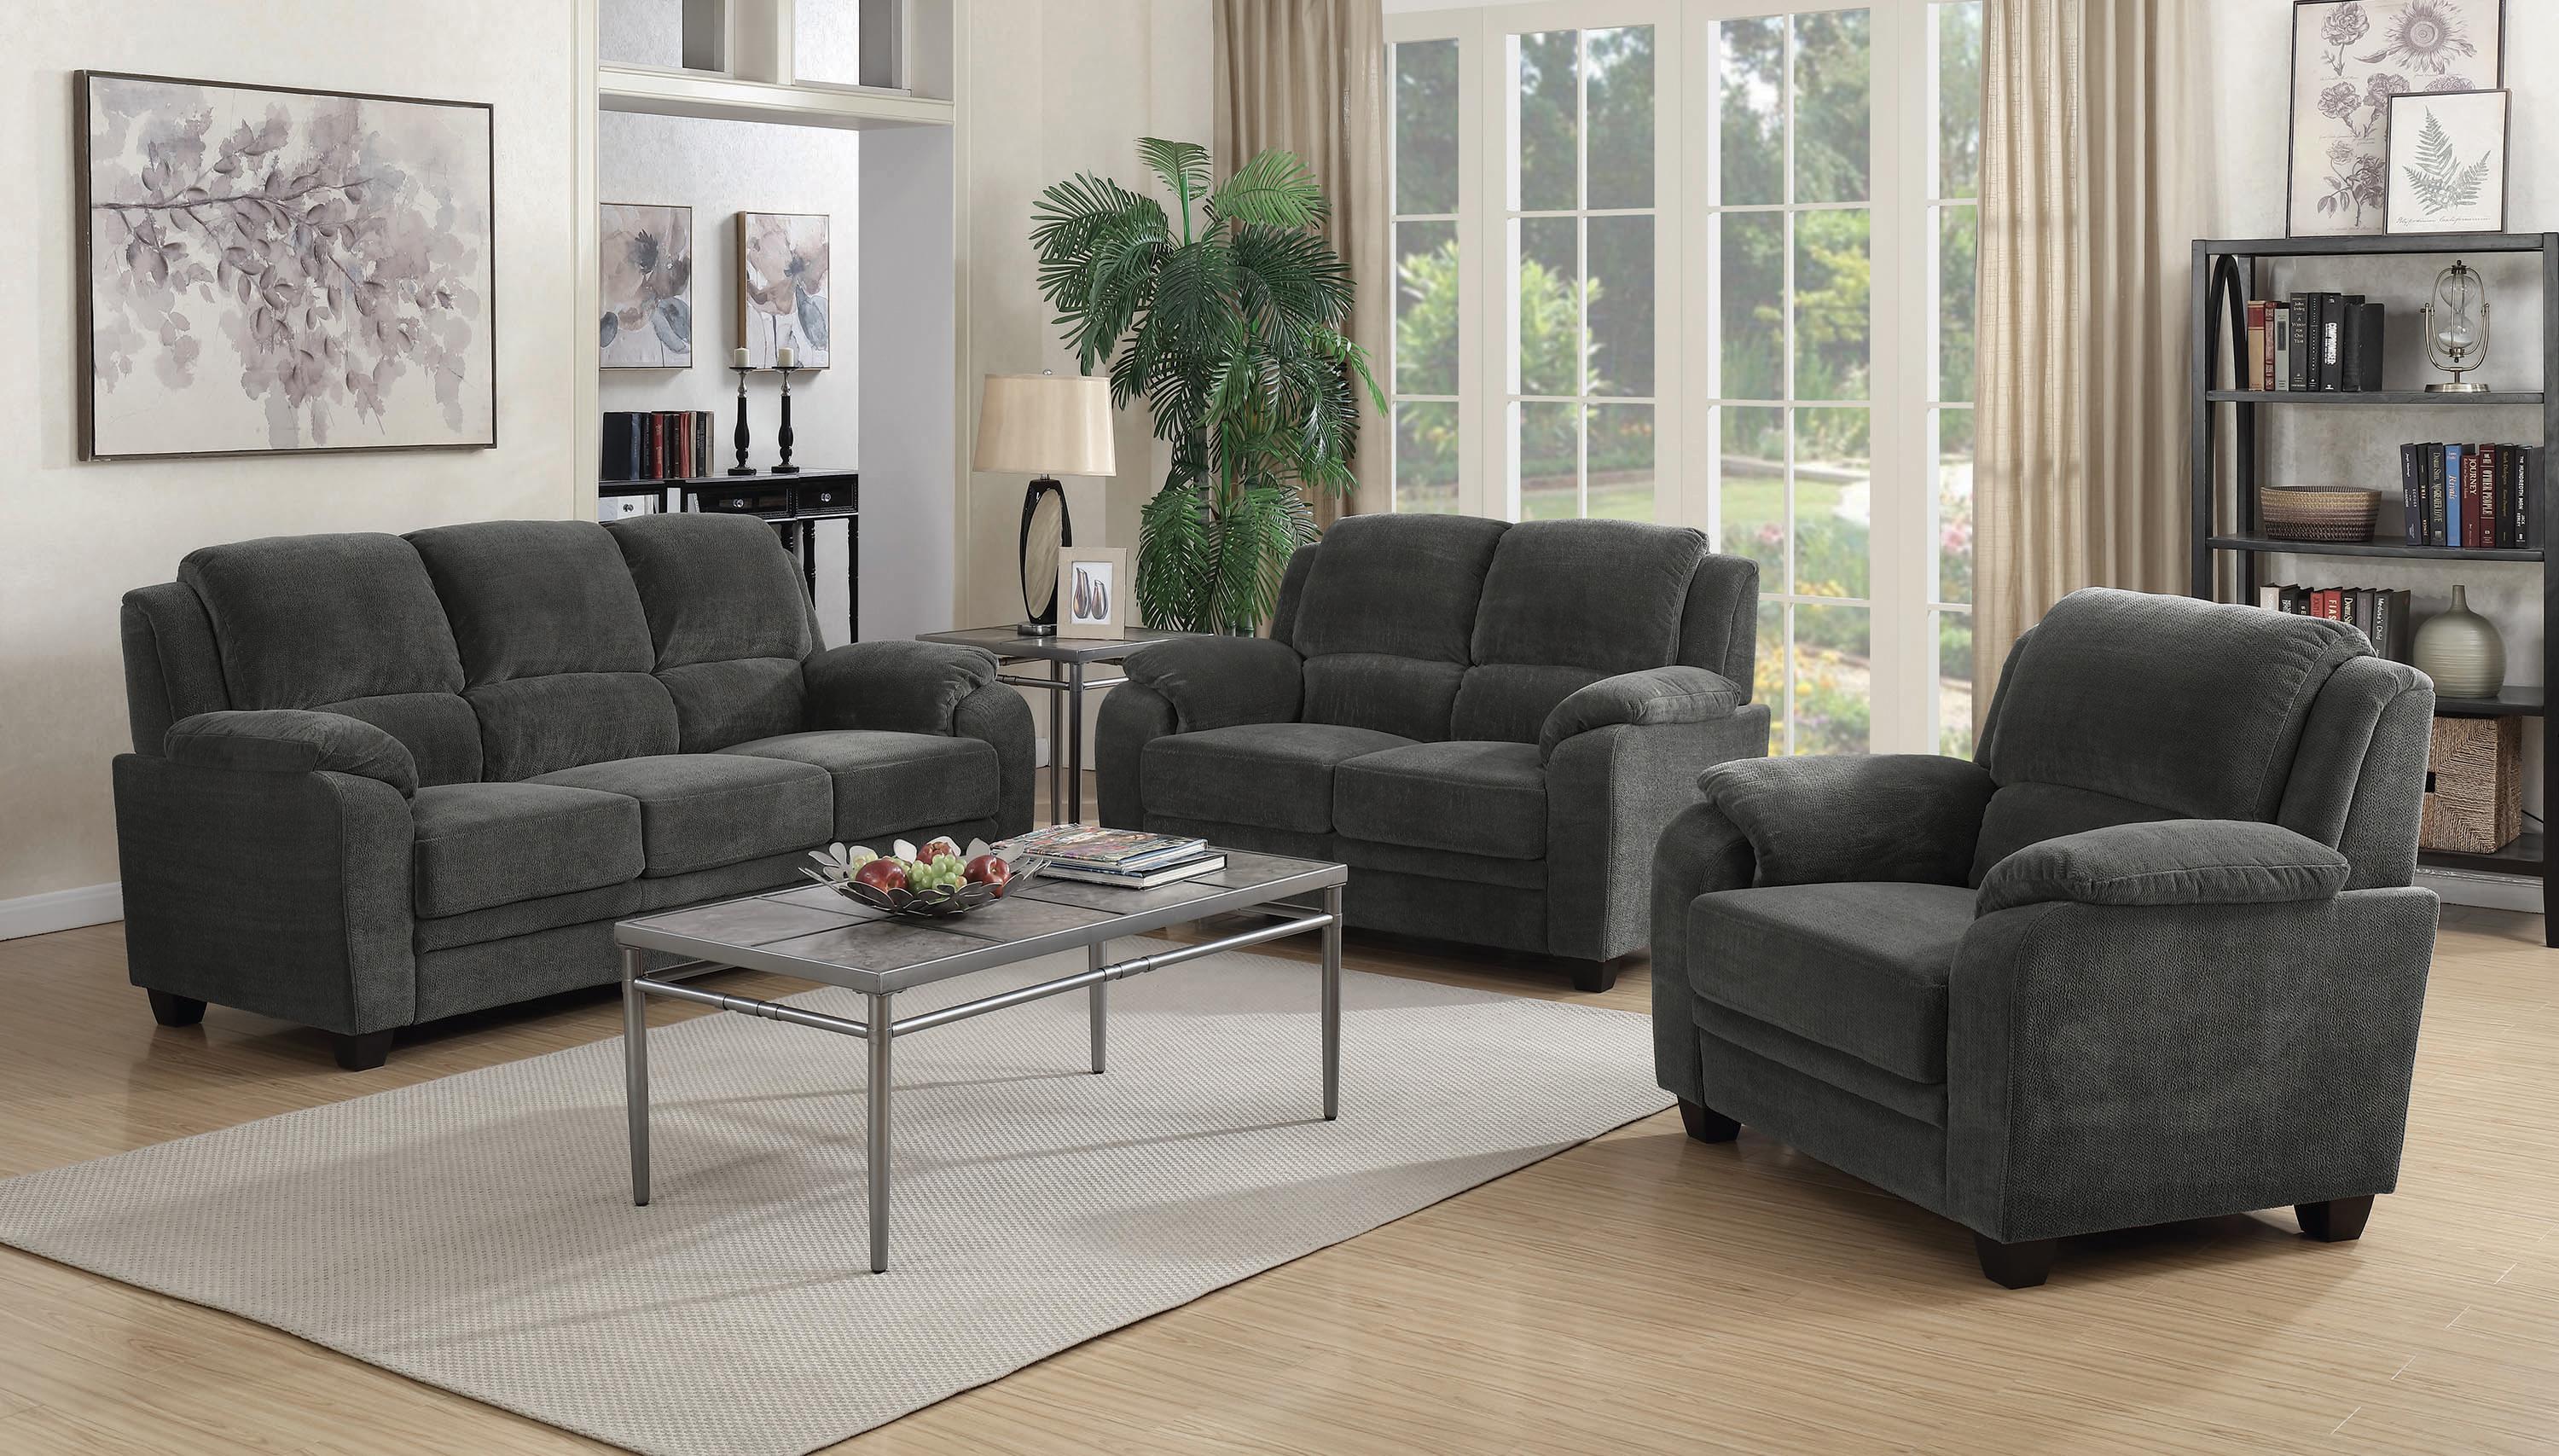 Transitional Living Room Set 506241-S2 Northend 506241-S2 in Charcoal 